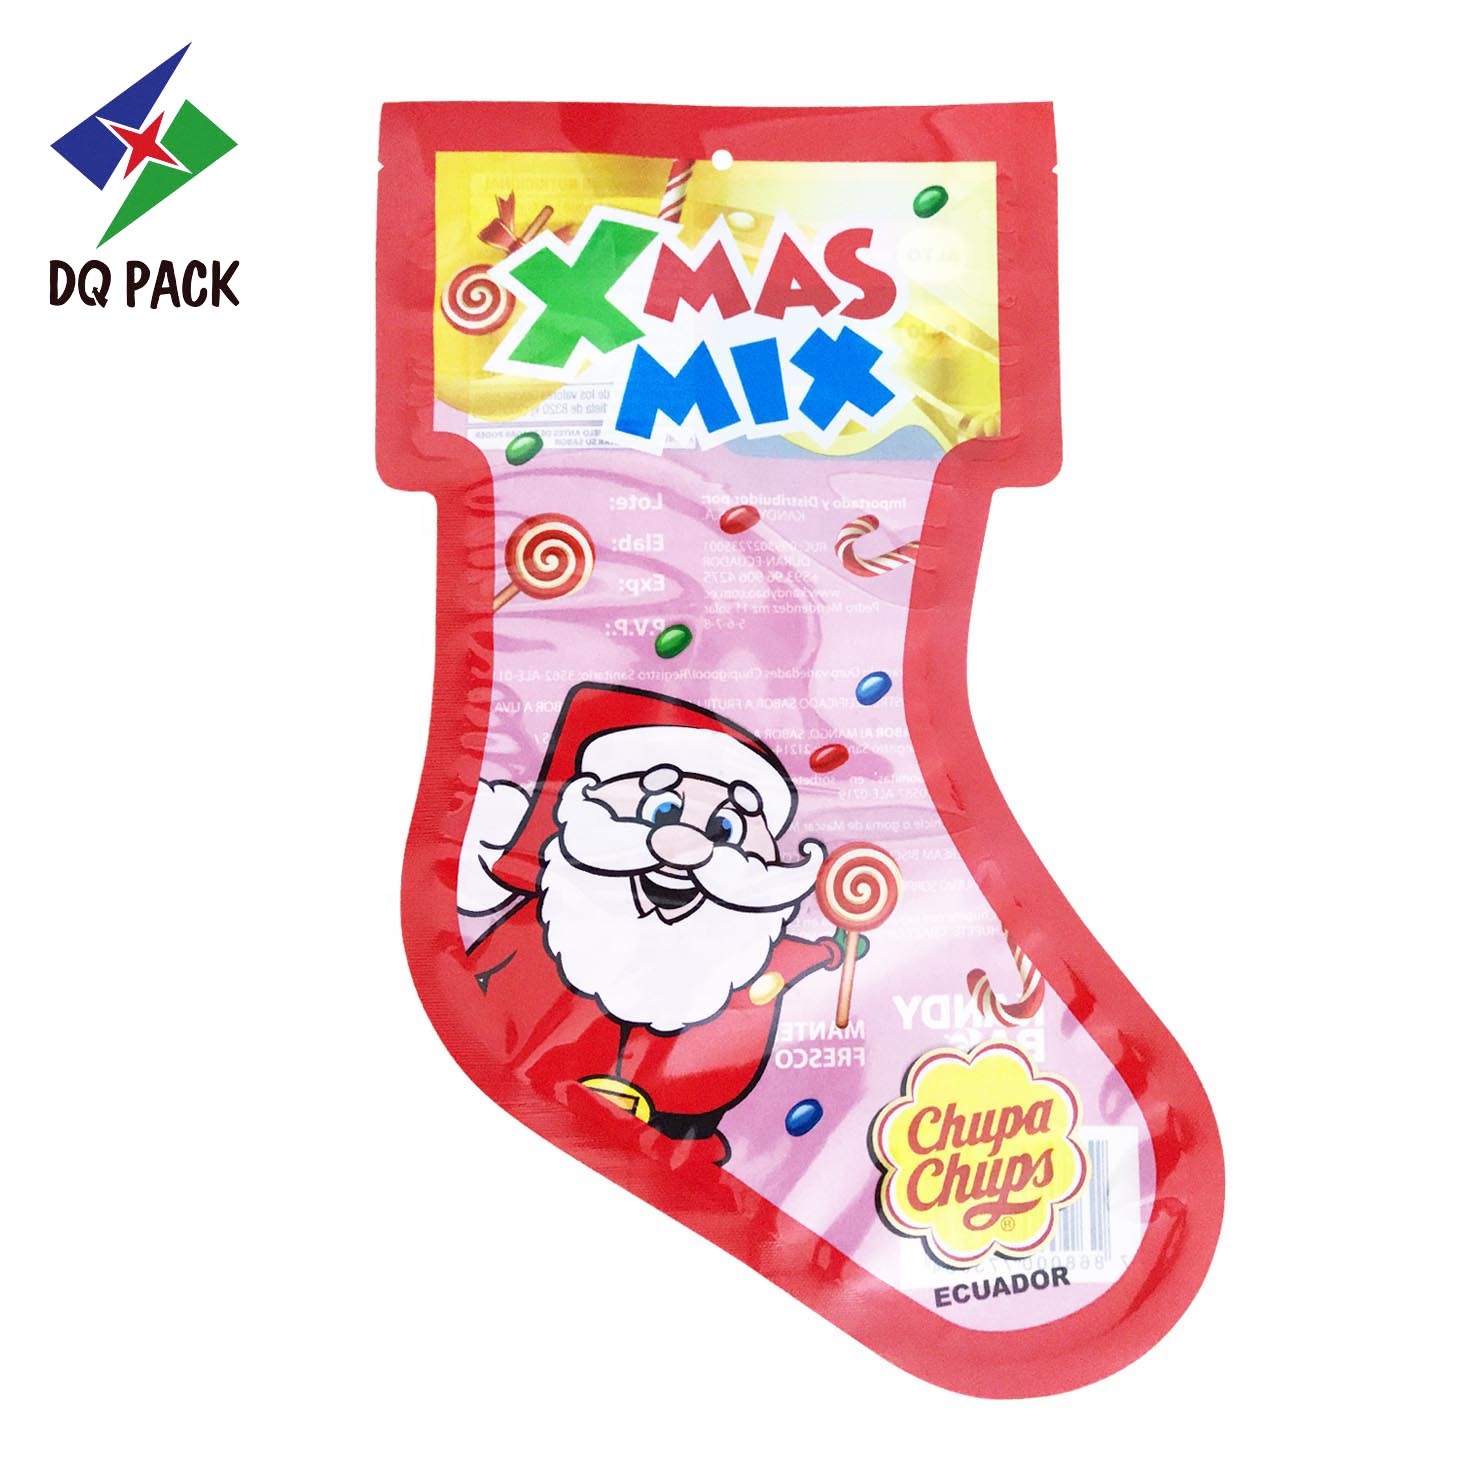 DQ PACK Customized Printed Special Shape Candy Packaging Bag Christmas Gift Bags For Party Festivals